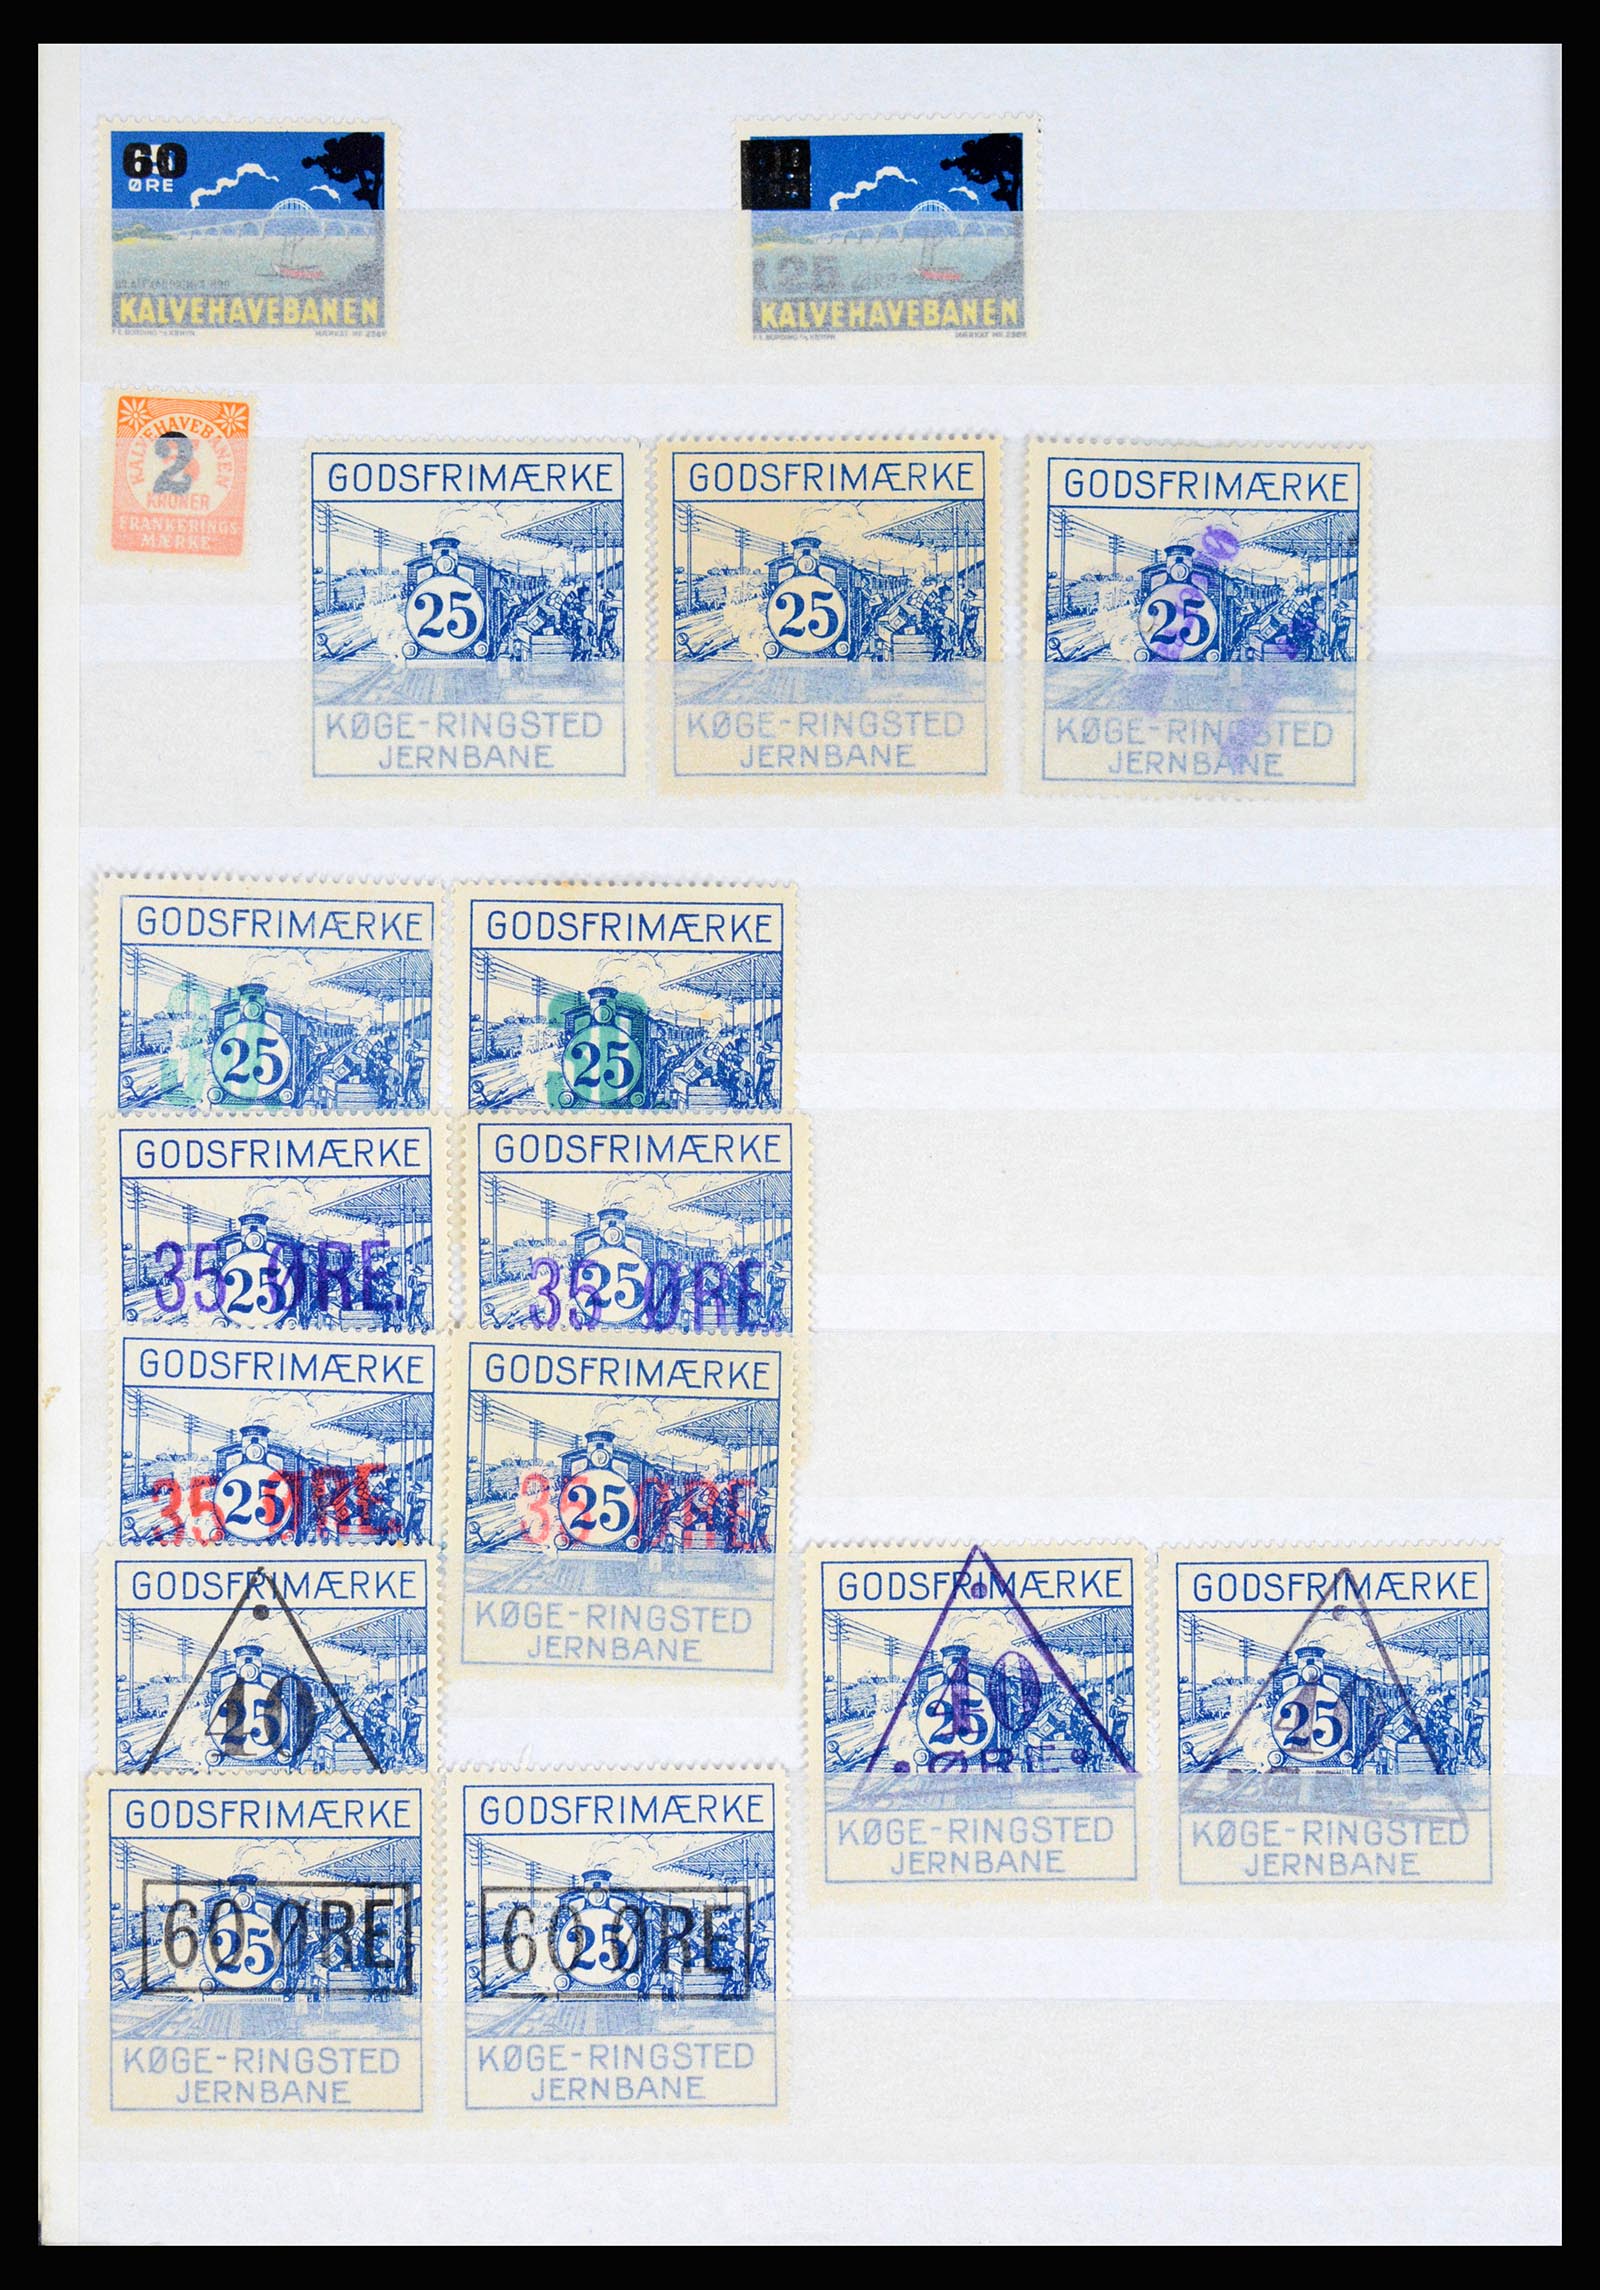 36982 032 - Stamp collection 36982 Denmark railroad stamps.